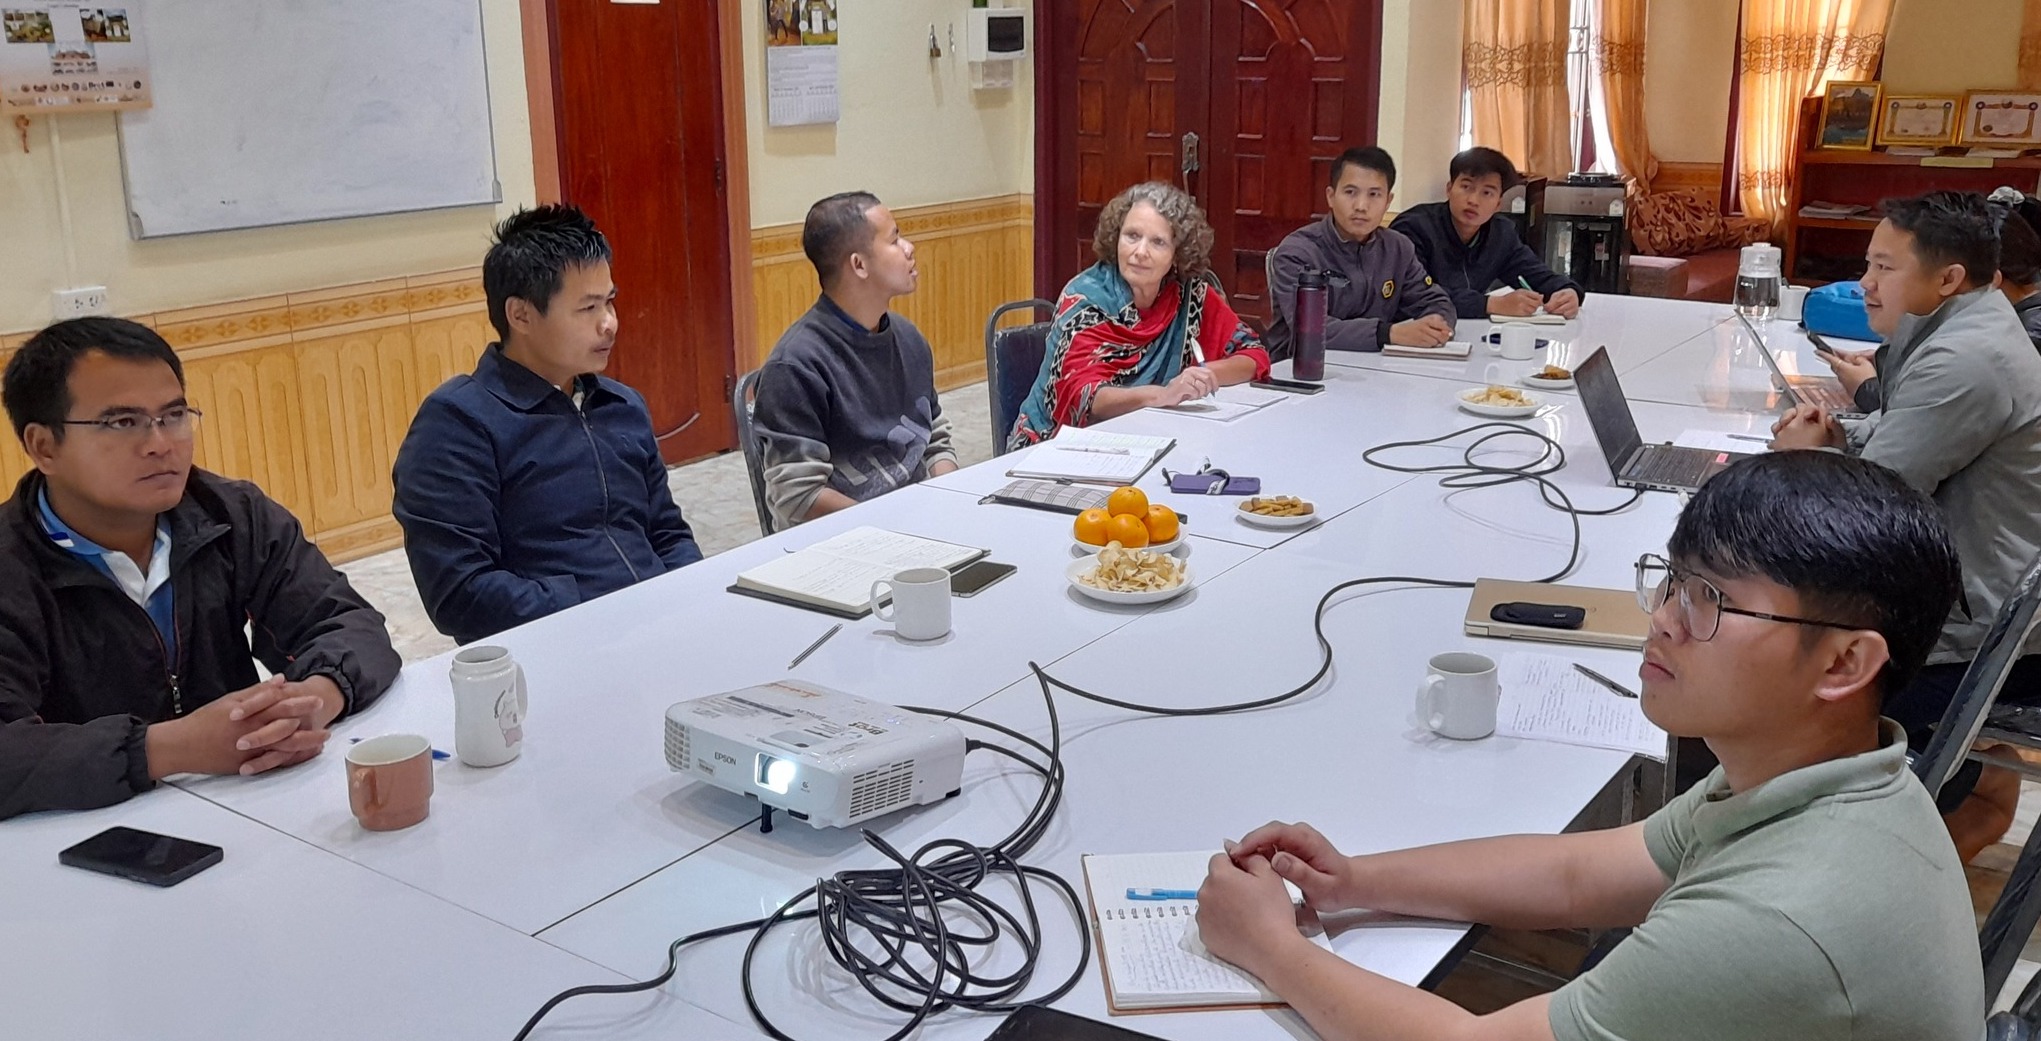 Lao Alumni with Marlies Roth sitting aourn a table with a projector discussing a presentation